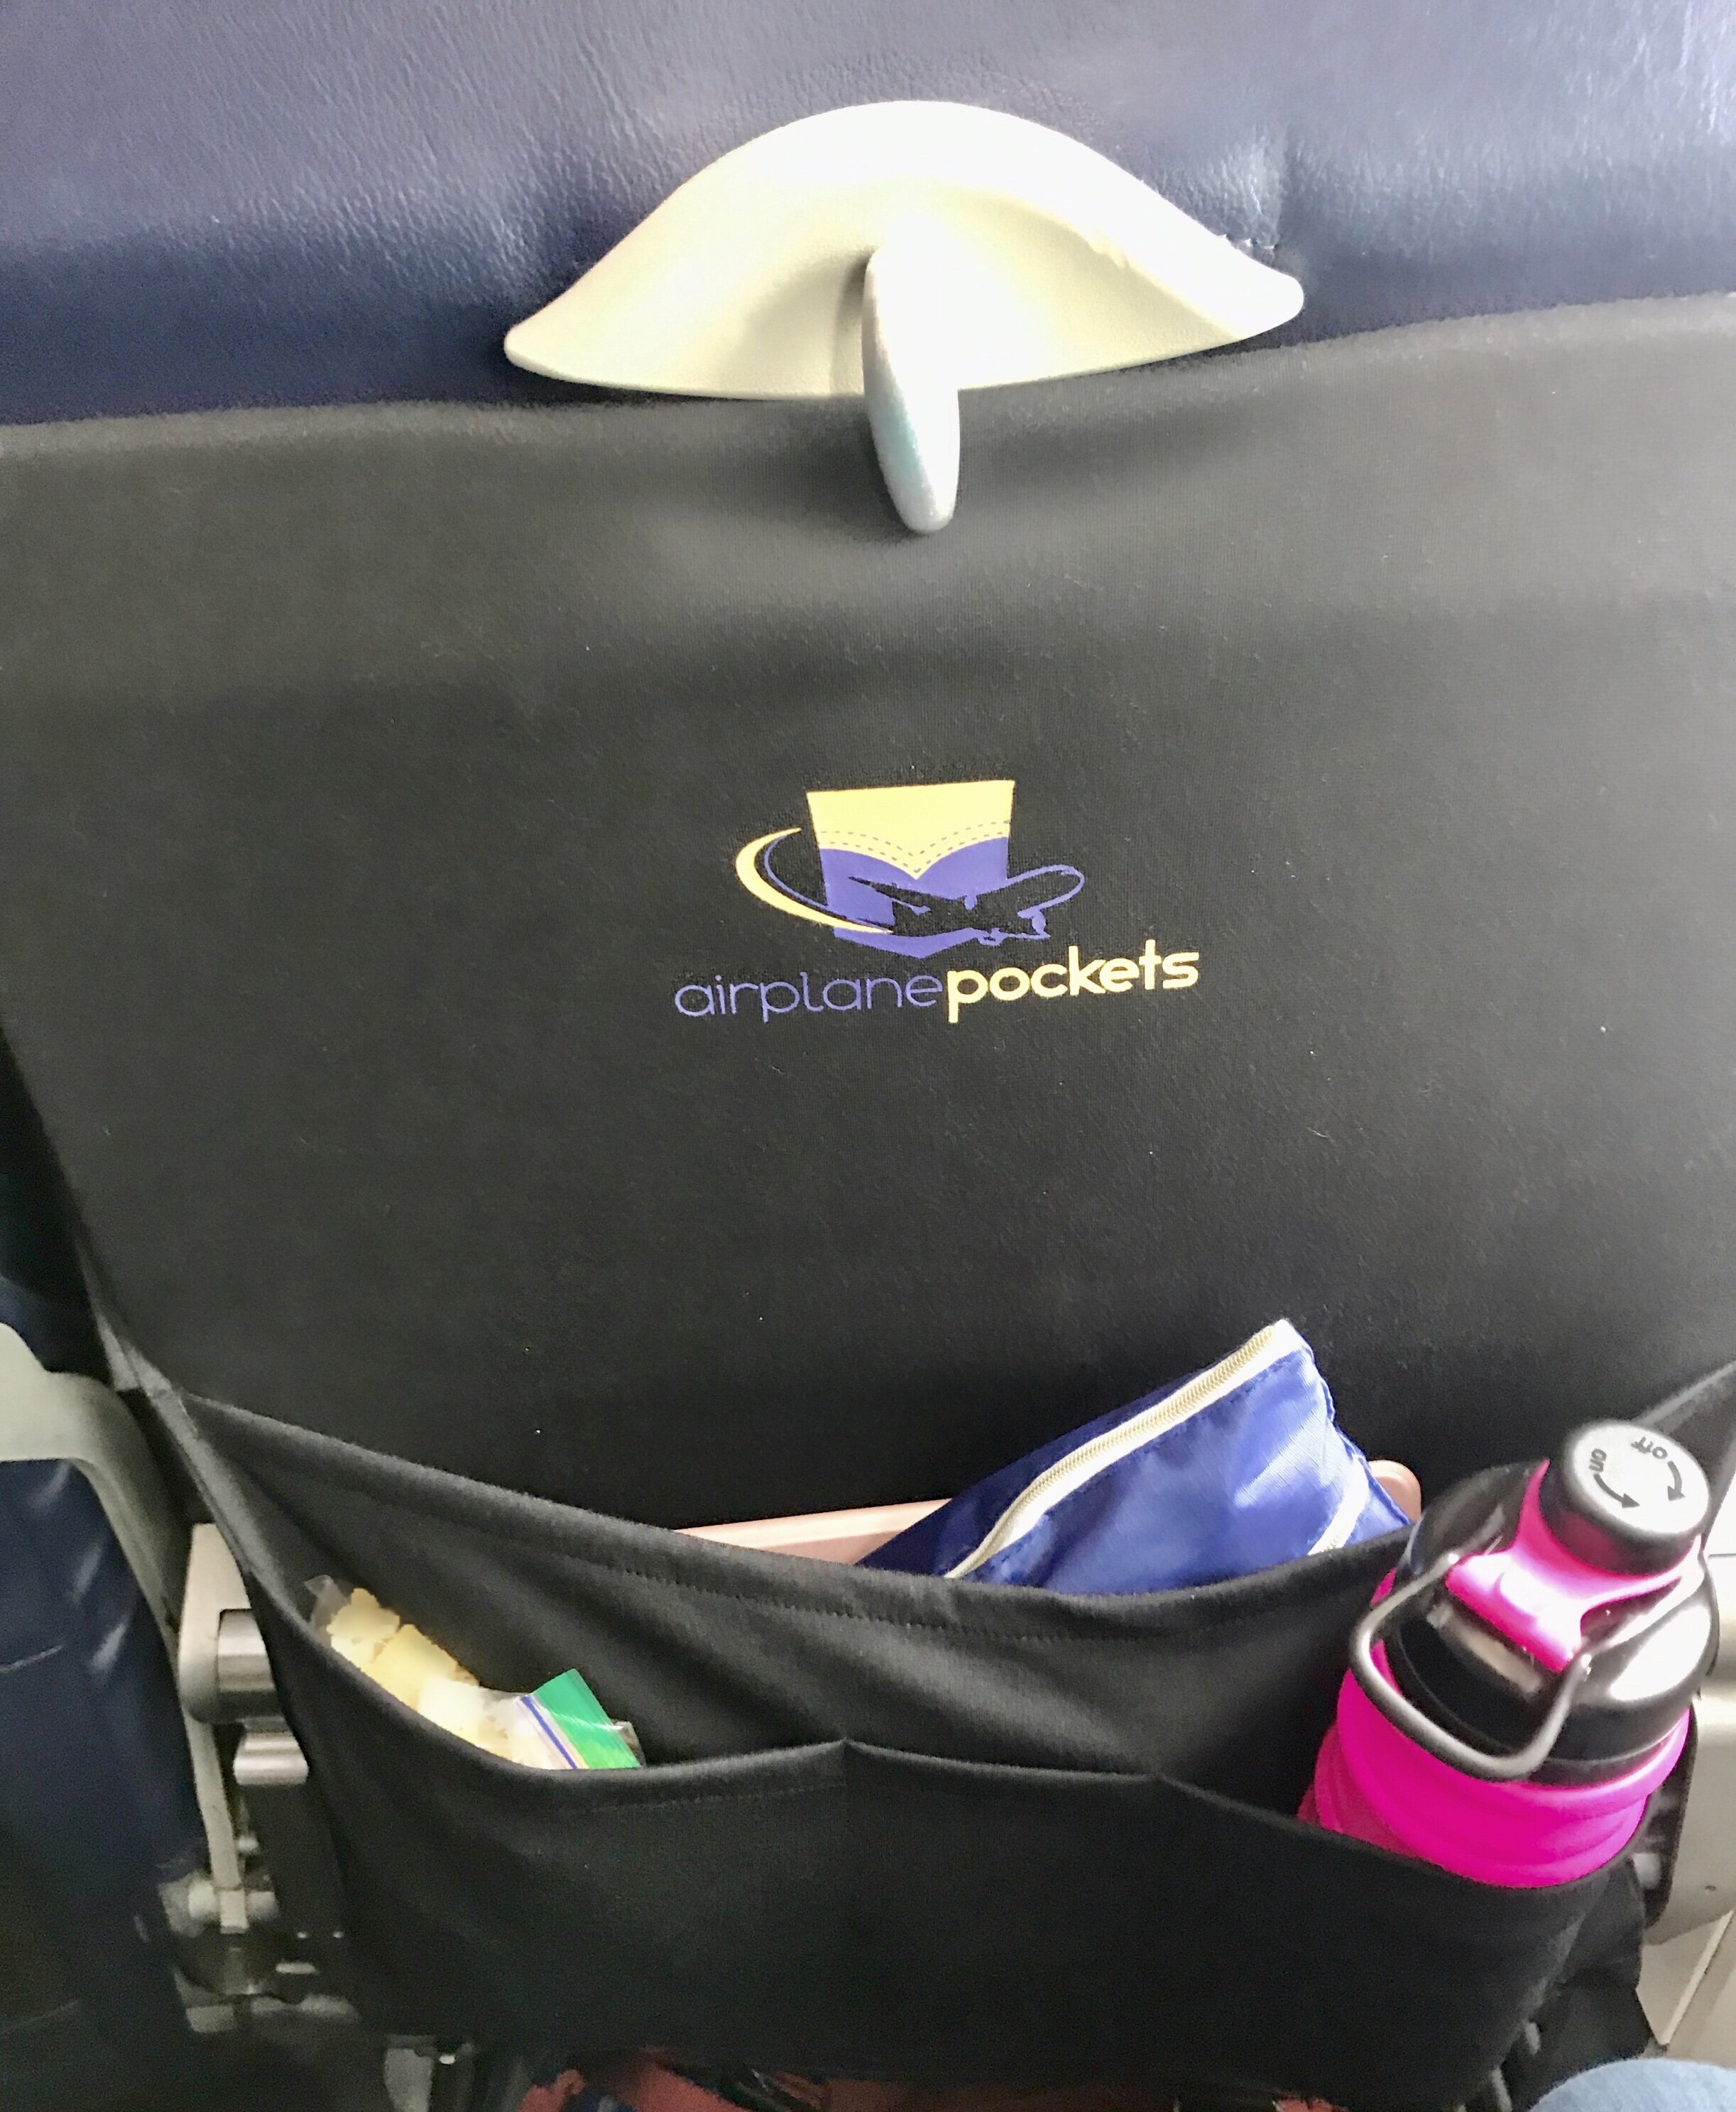 It was so nice having my snacks, water bottle, iPad, headphones, and other goodies organized and at my fingertips in flight, PLUS my stuff never touched the germy seat back pocket or tray table.